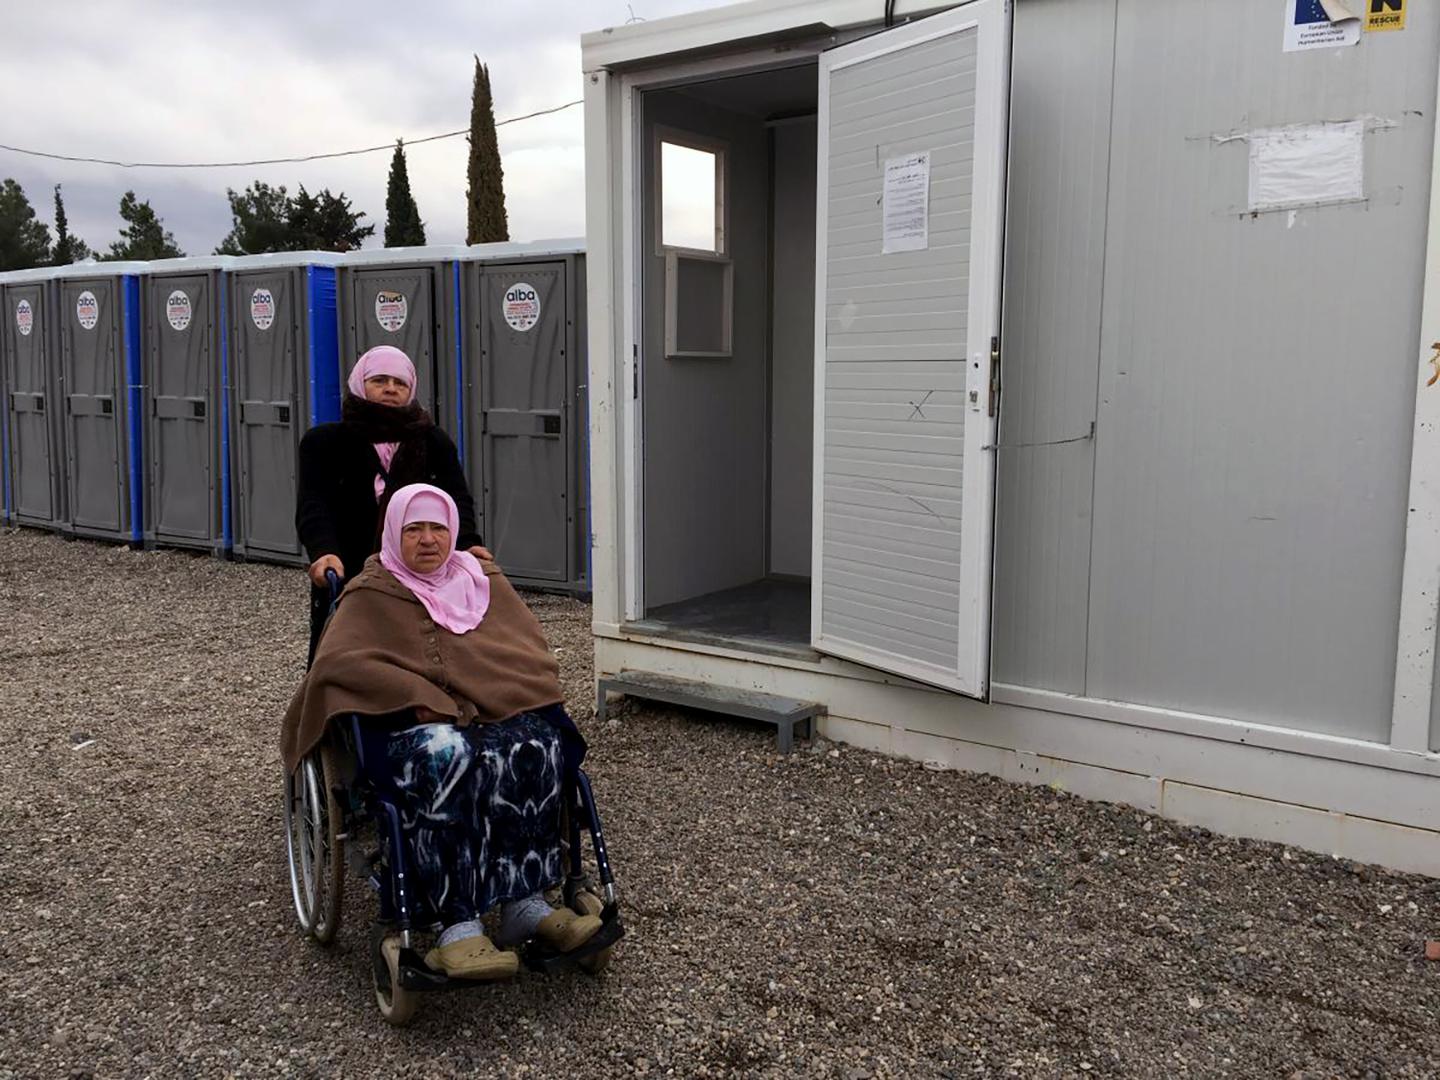 Naima, a 70-year-old woman with a disability from Aleppo, Syria, with her daughter, Hasne, in front of the shower area in Cherso camp, Thessaloniki, Greece. The showers are not accessible for people who use a wheelchair. 